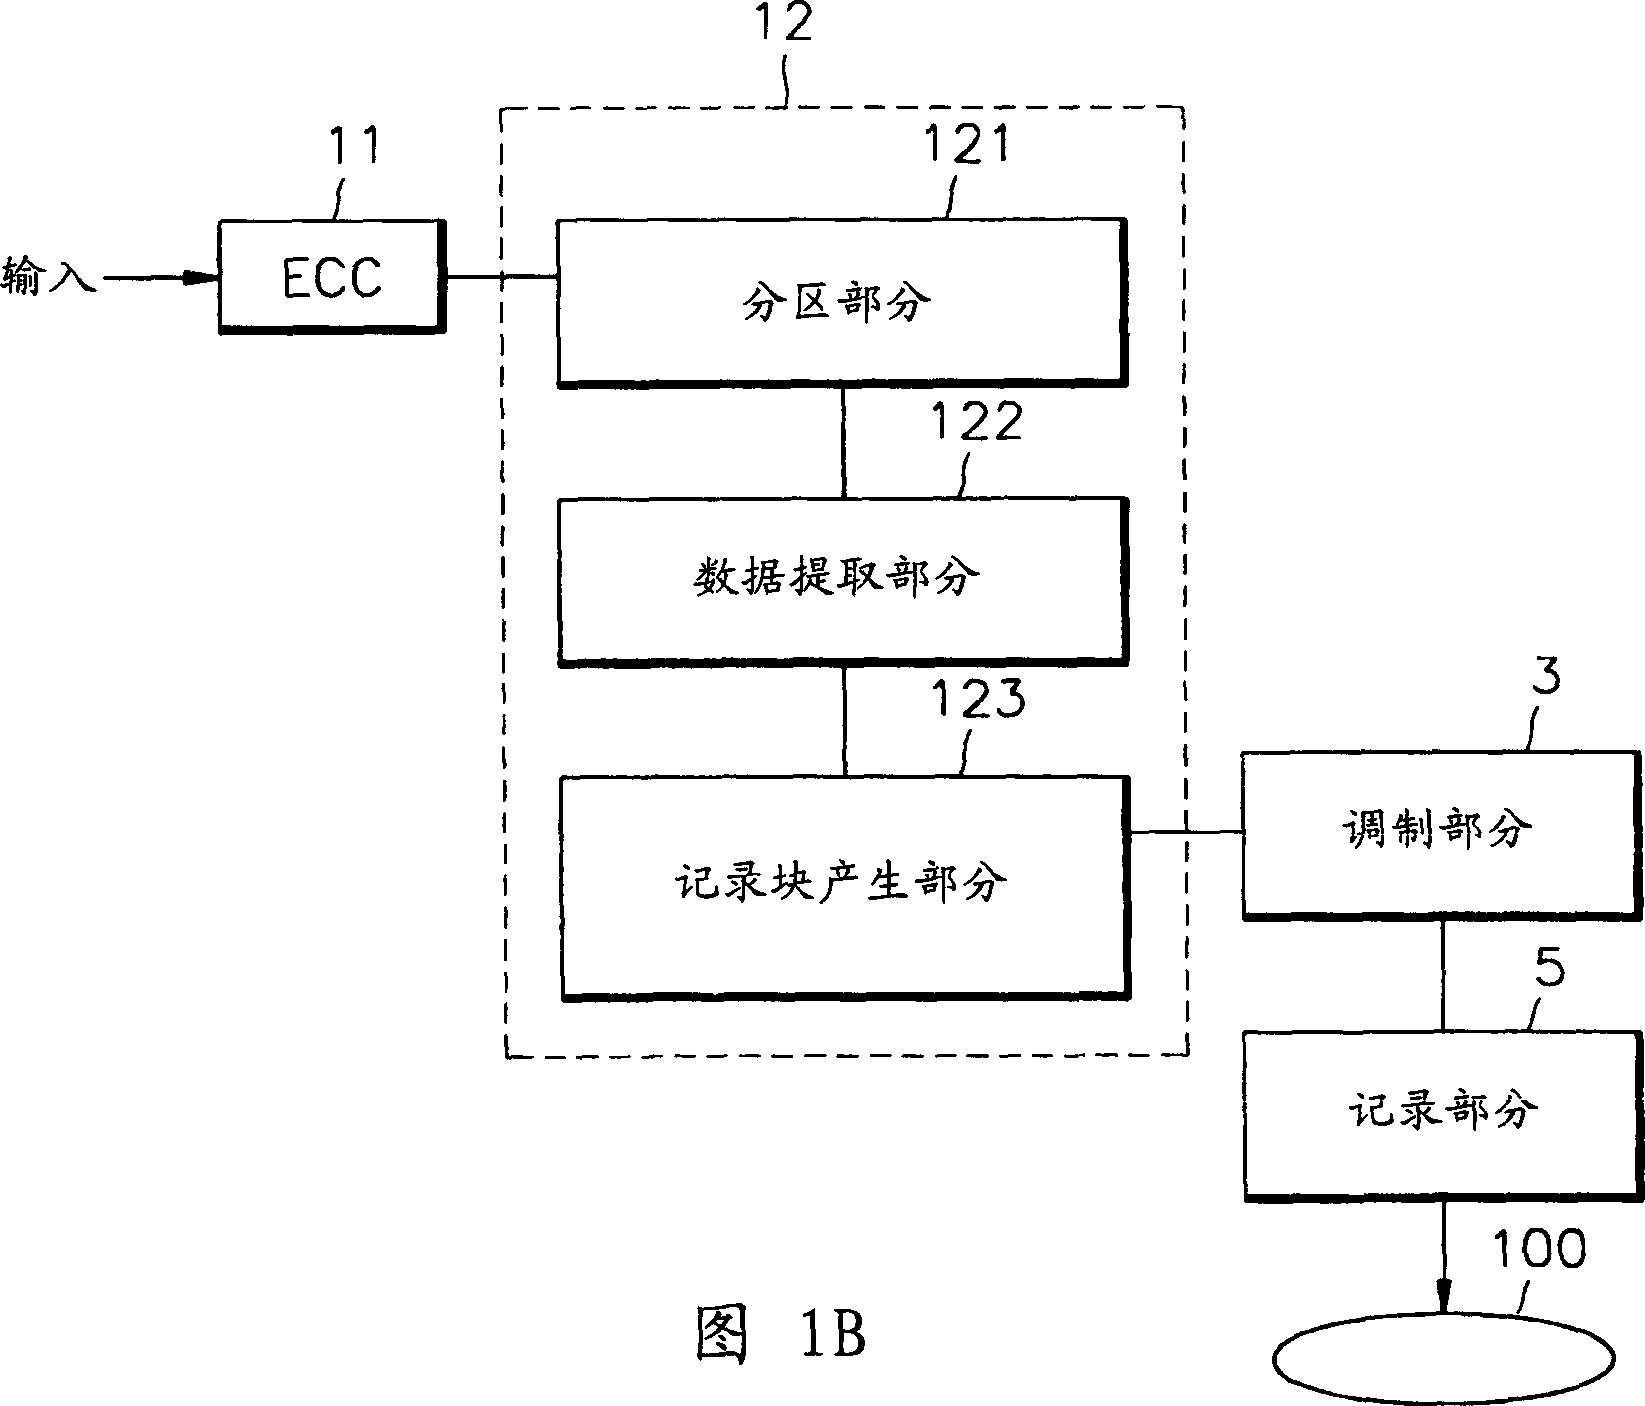 Optical recording medium, data recording device and data recording method used by such device